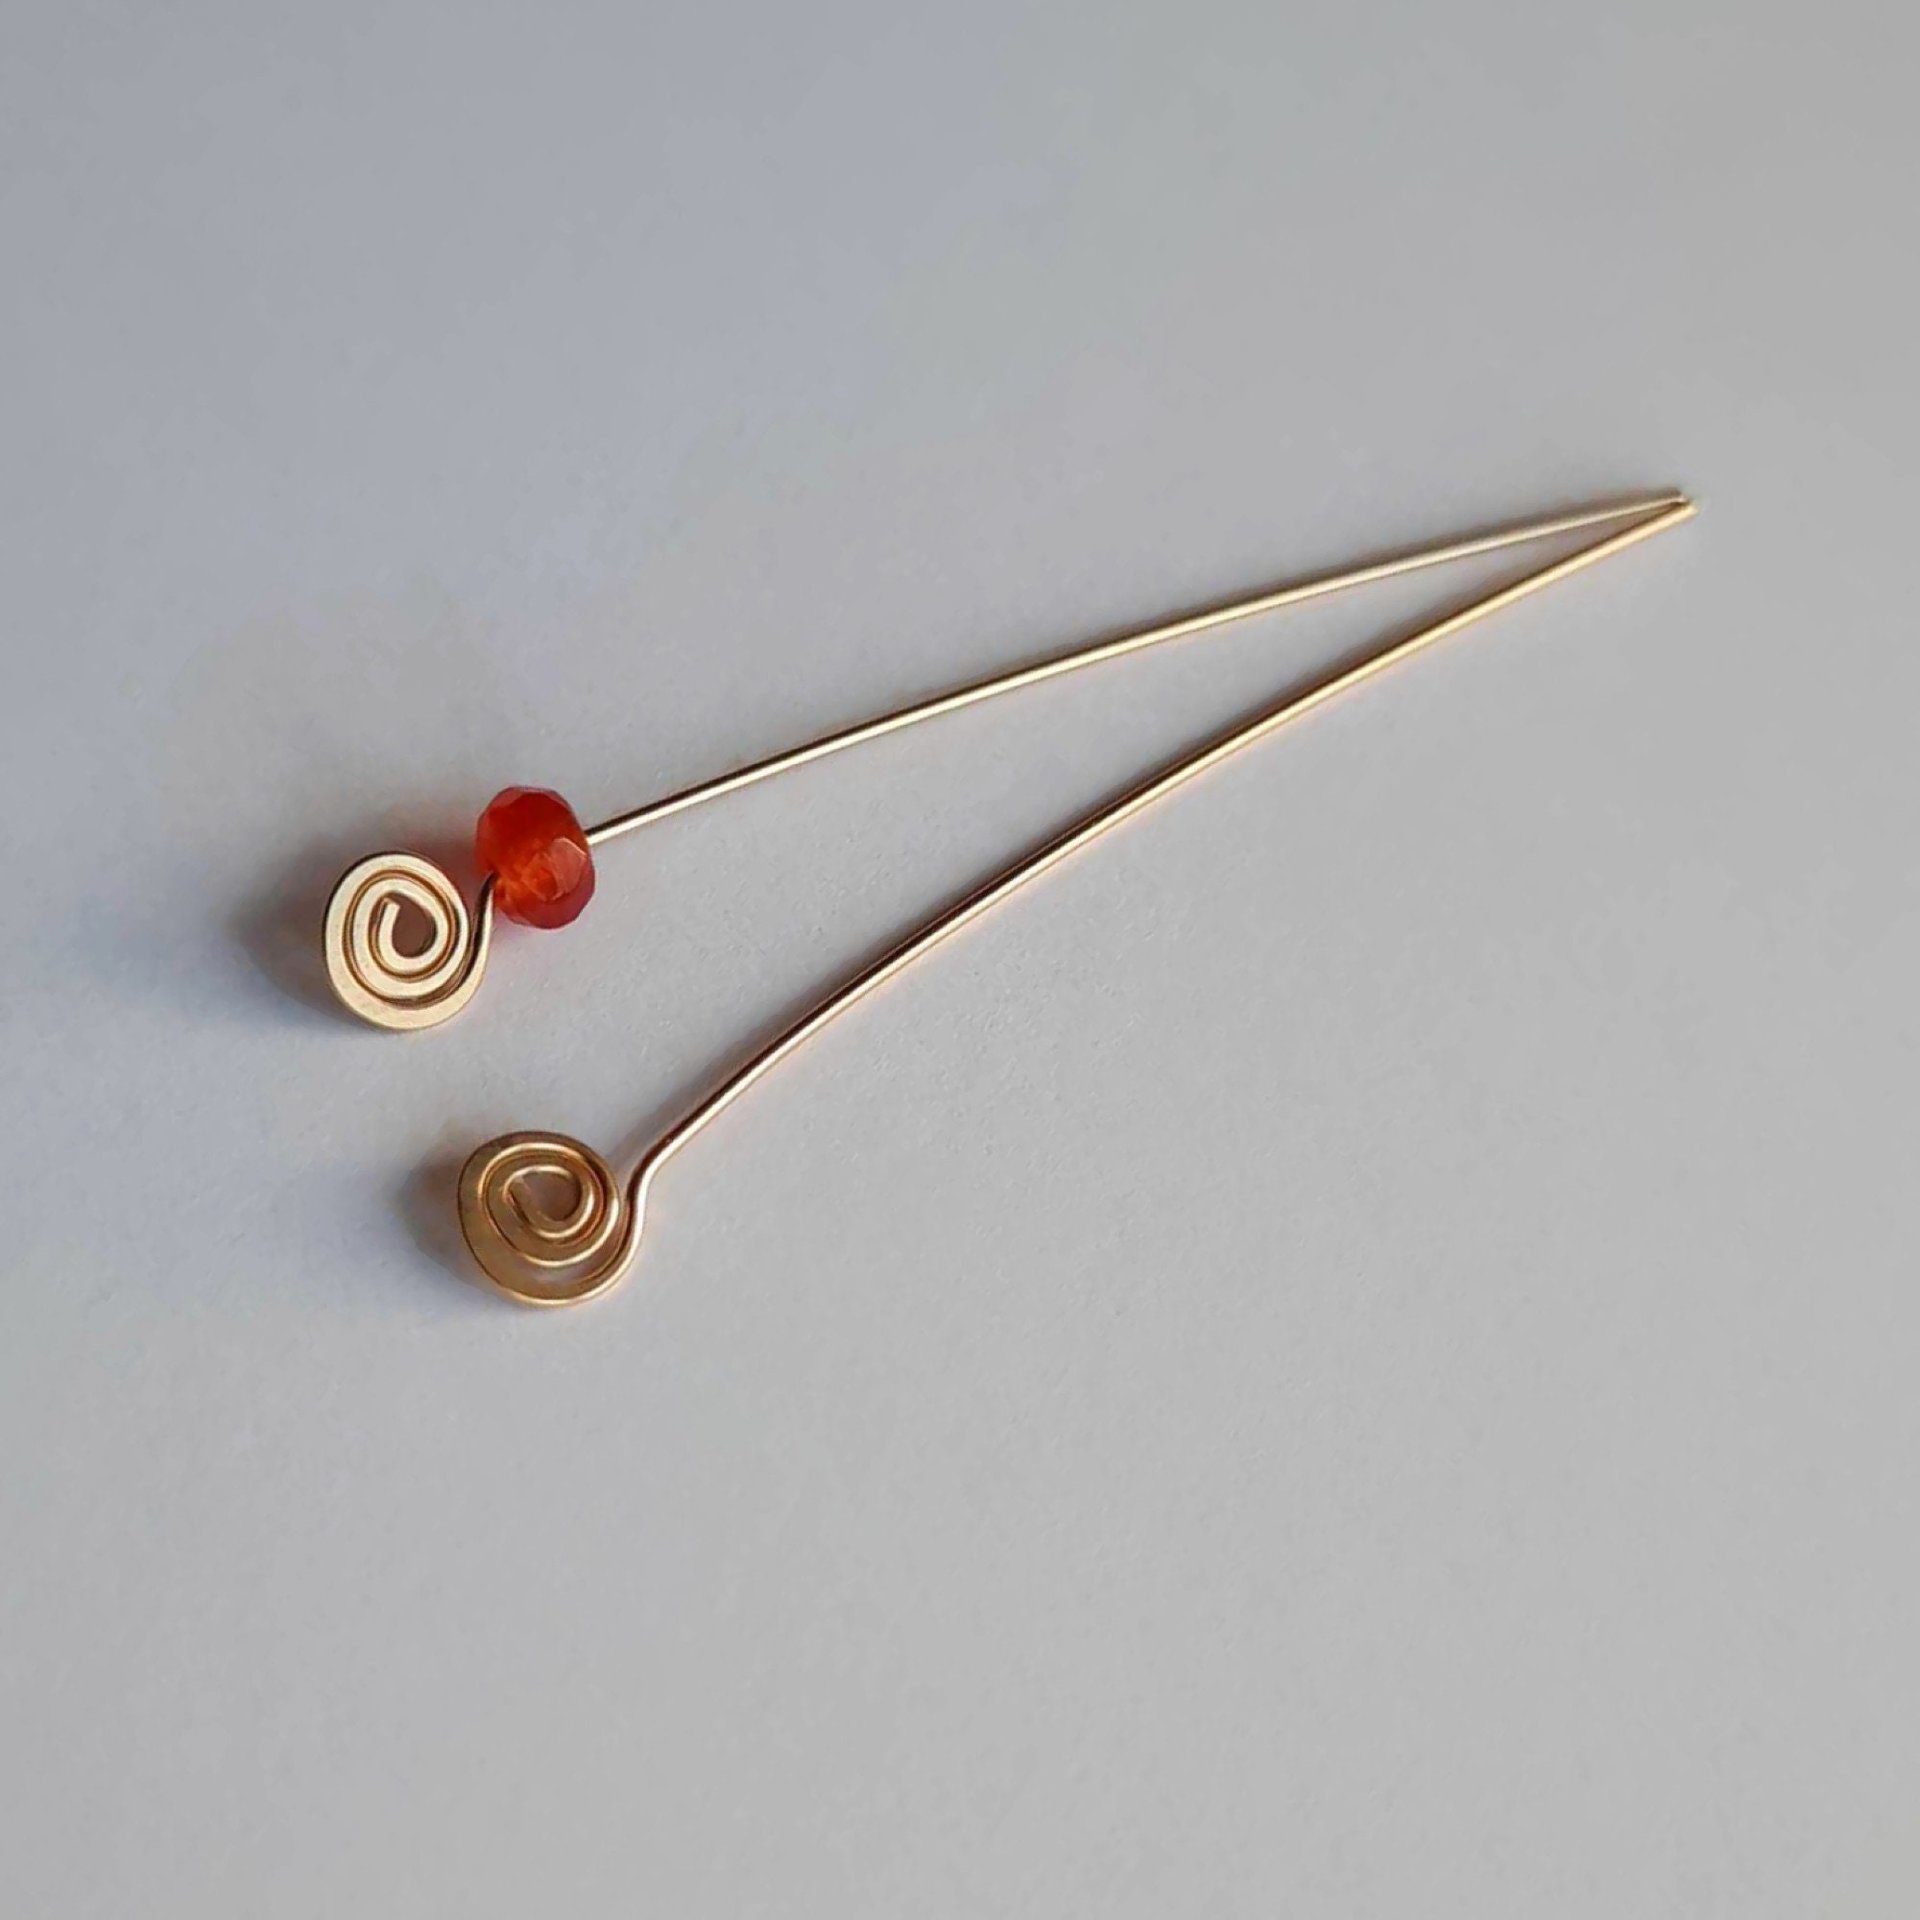 Pair of 14 Ct Gold Filled Spiral Tip Fancy Headpins, hand crafted by The Tiny Tree Frog Jewellery 